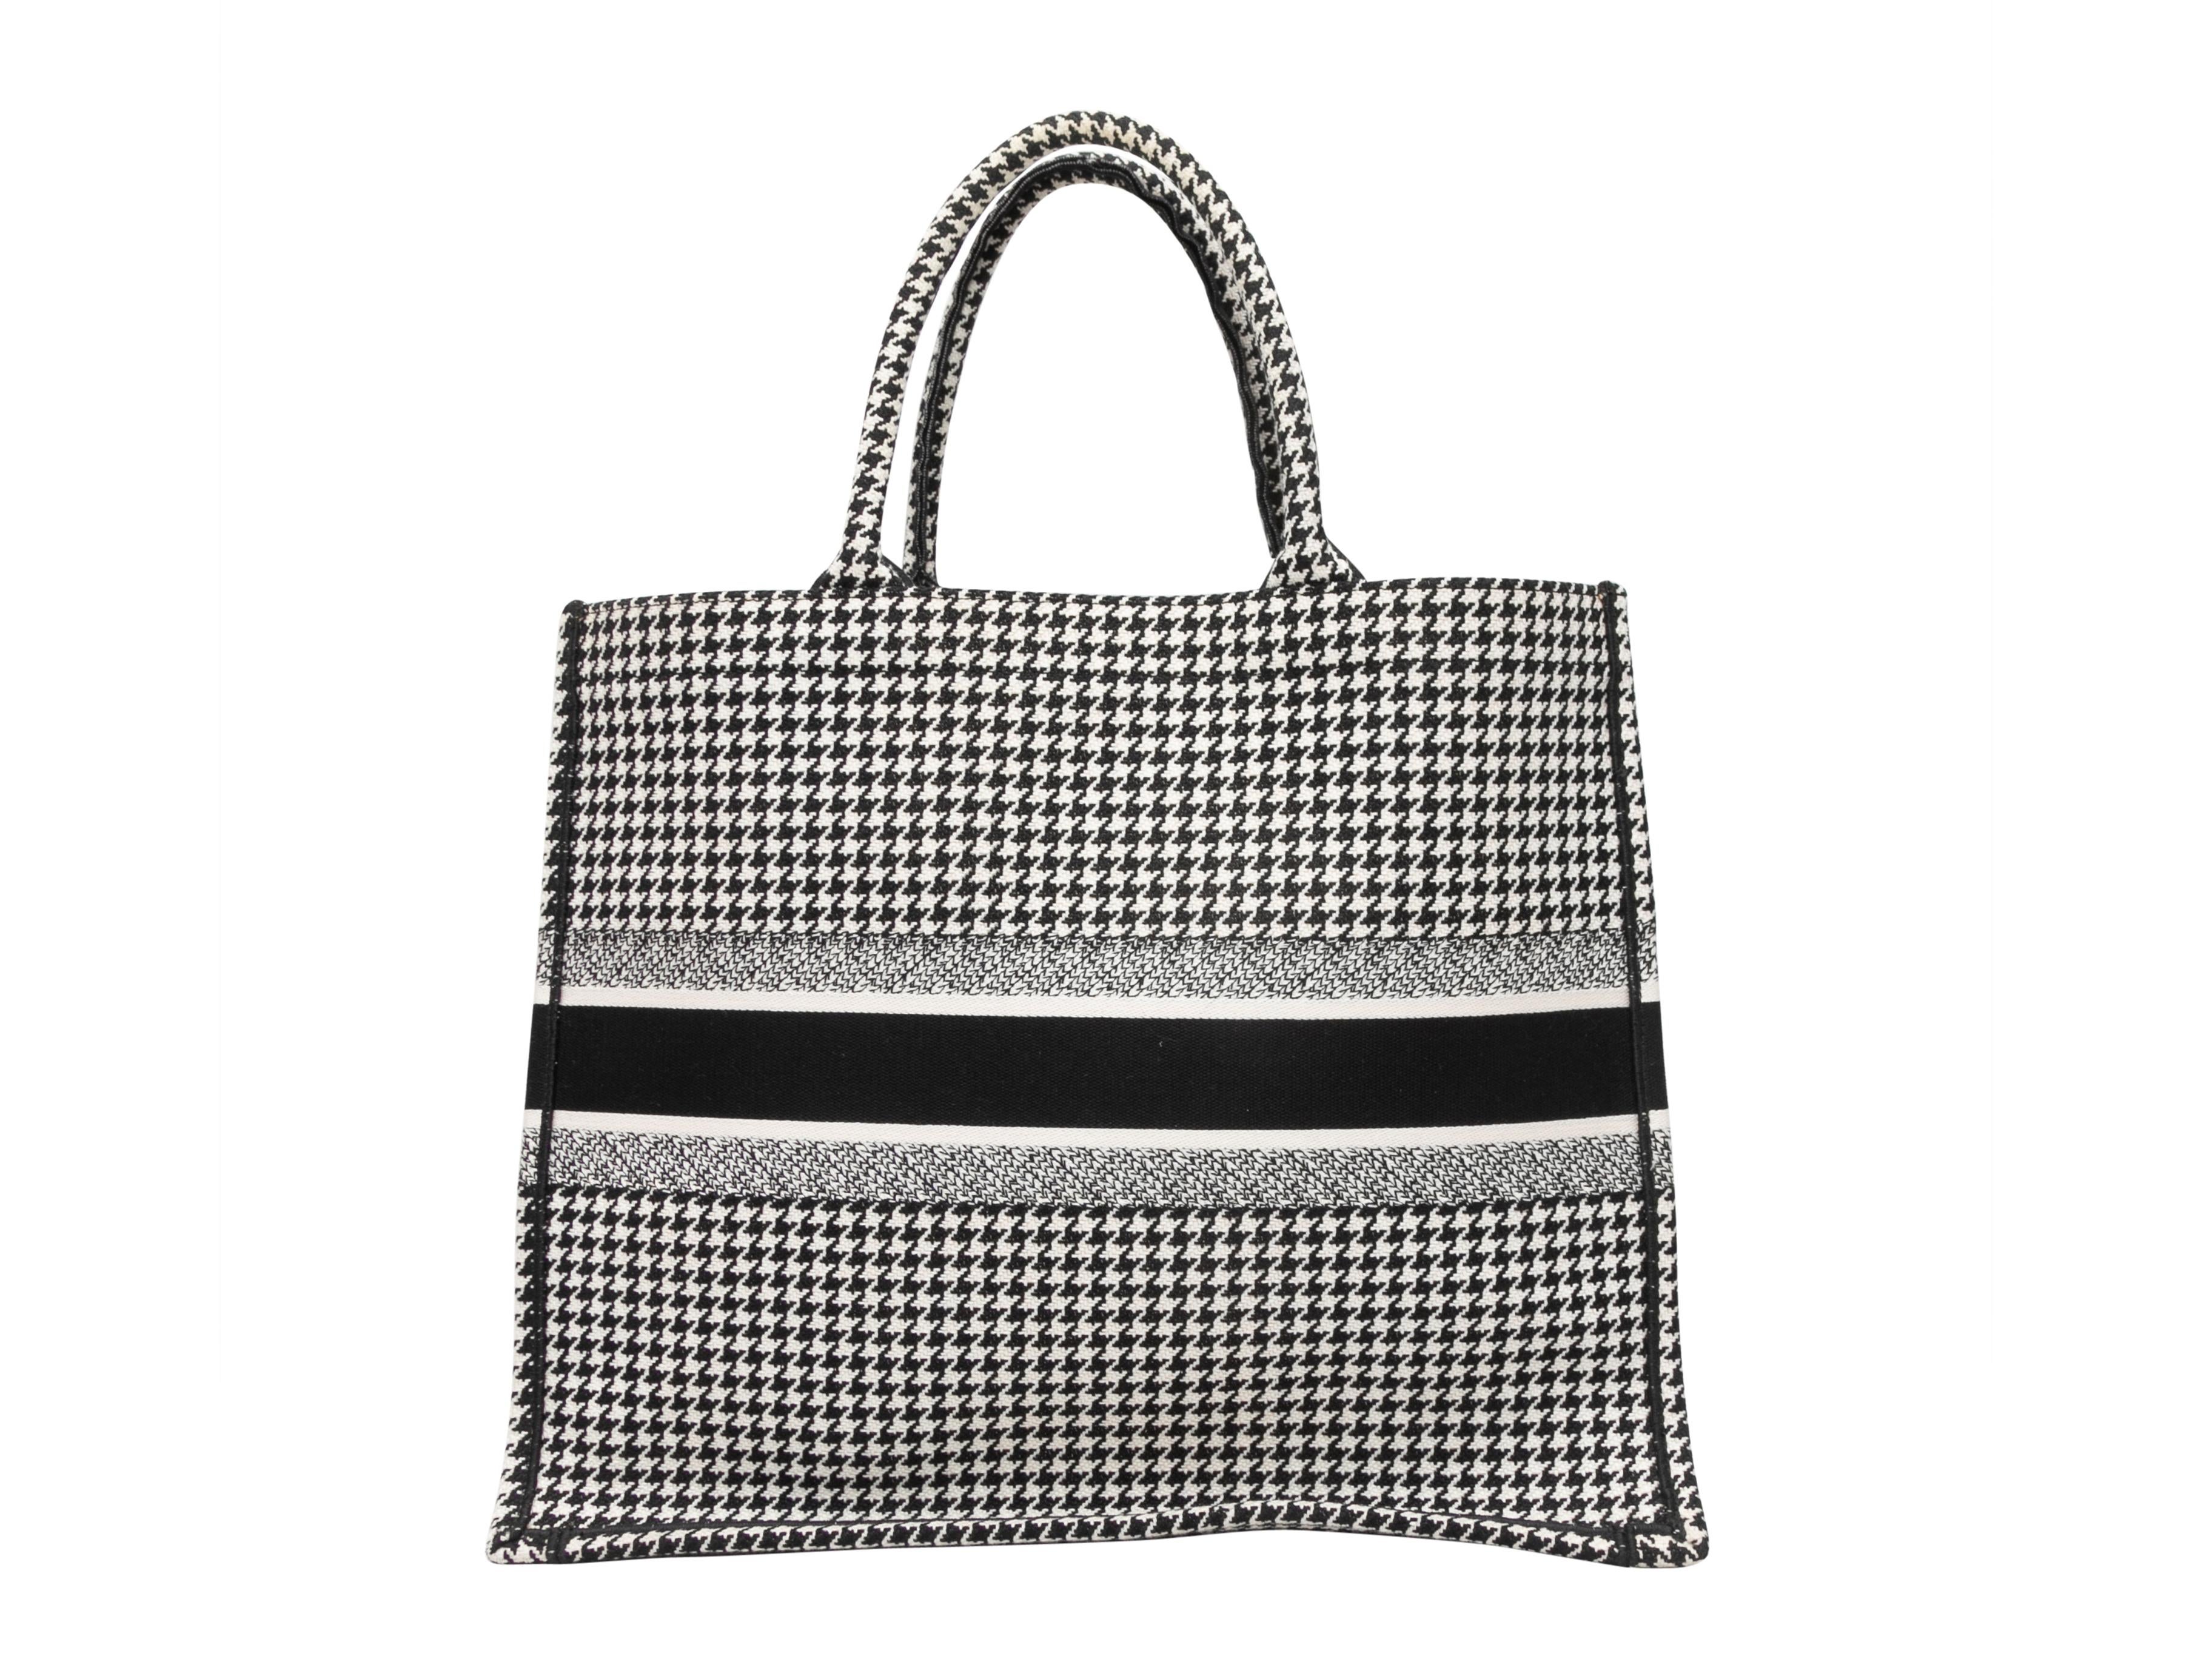 Black & White Christian Dior Medium Houndstooth Book Tote. The Medium Houndstooth Book Tote features a canvas body and dual rolled top handles. 16.5